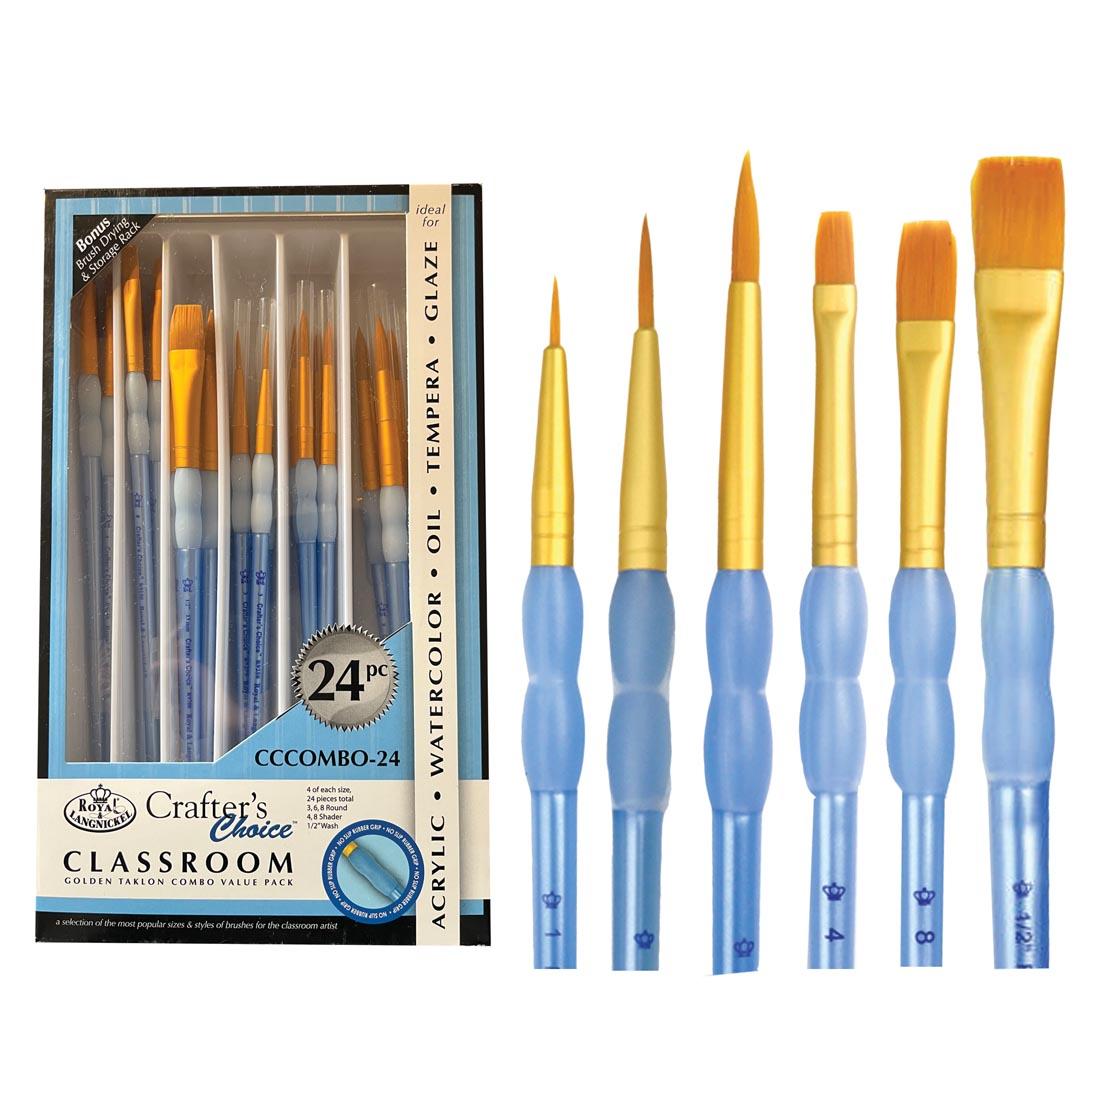 package of Royal & Langnickel Crafter's Choice Classroom Golden Taklon Value Pack beside samples of the 6 brush types